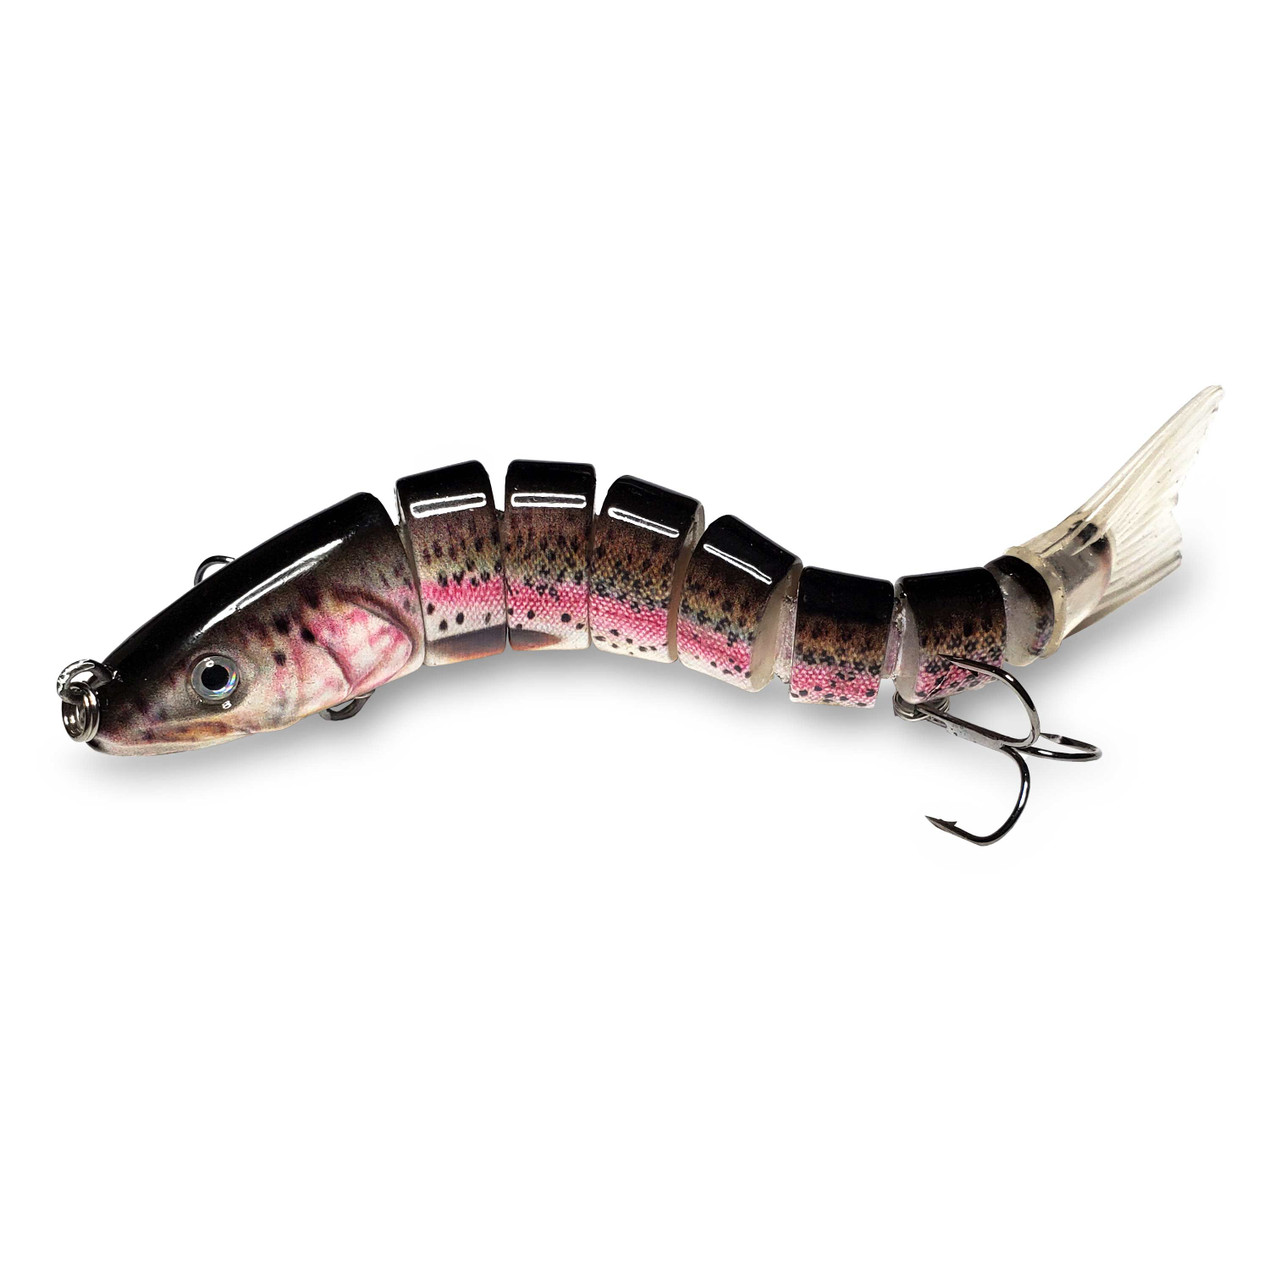 Trout Swimbaits, 5.5 8 Segments. 2 Lures, 2 colors. Soft Tail, 2/pack.